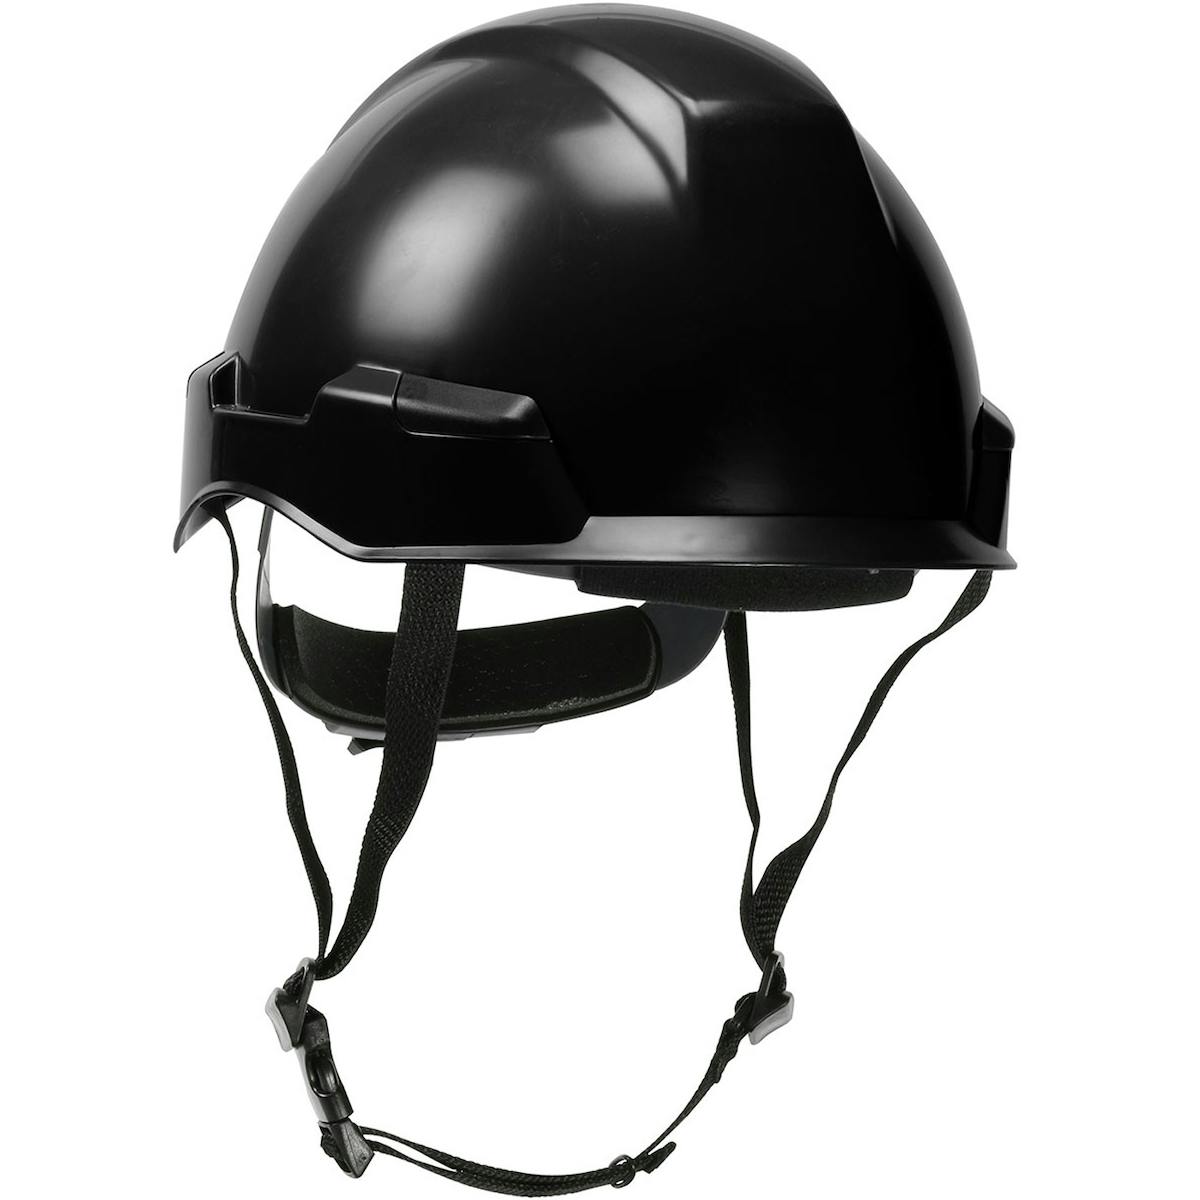 Rocky™ Industrial Climbing Helmet with Polycarbonate / ABS Shell, Nylon Suspension, Wheel Ratchet Adjustment and 4-Point Chin Strap (280-HP141R)_2